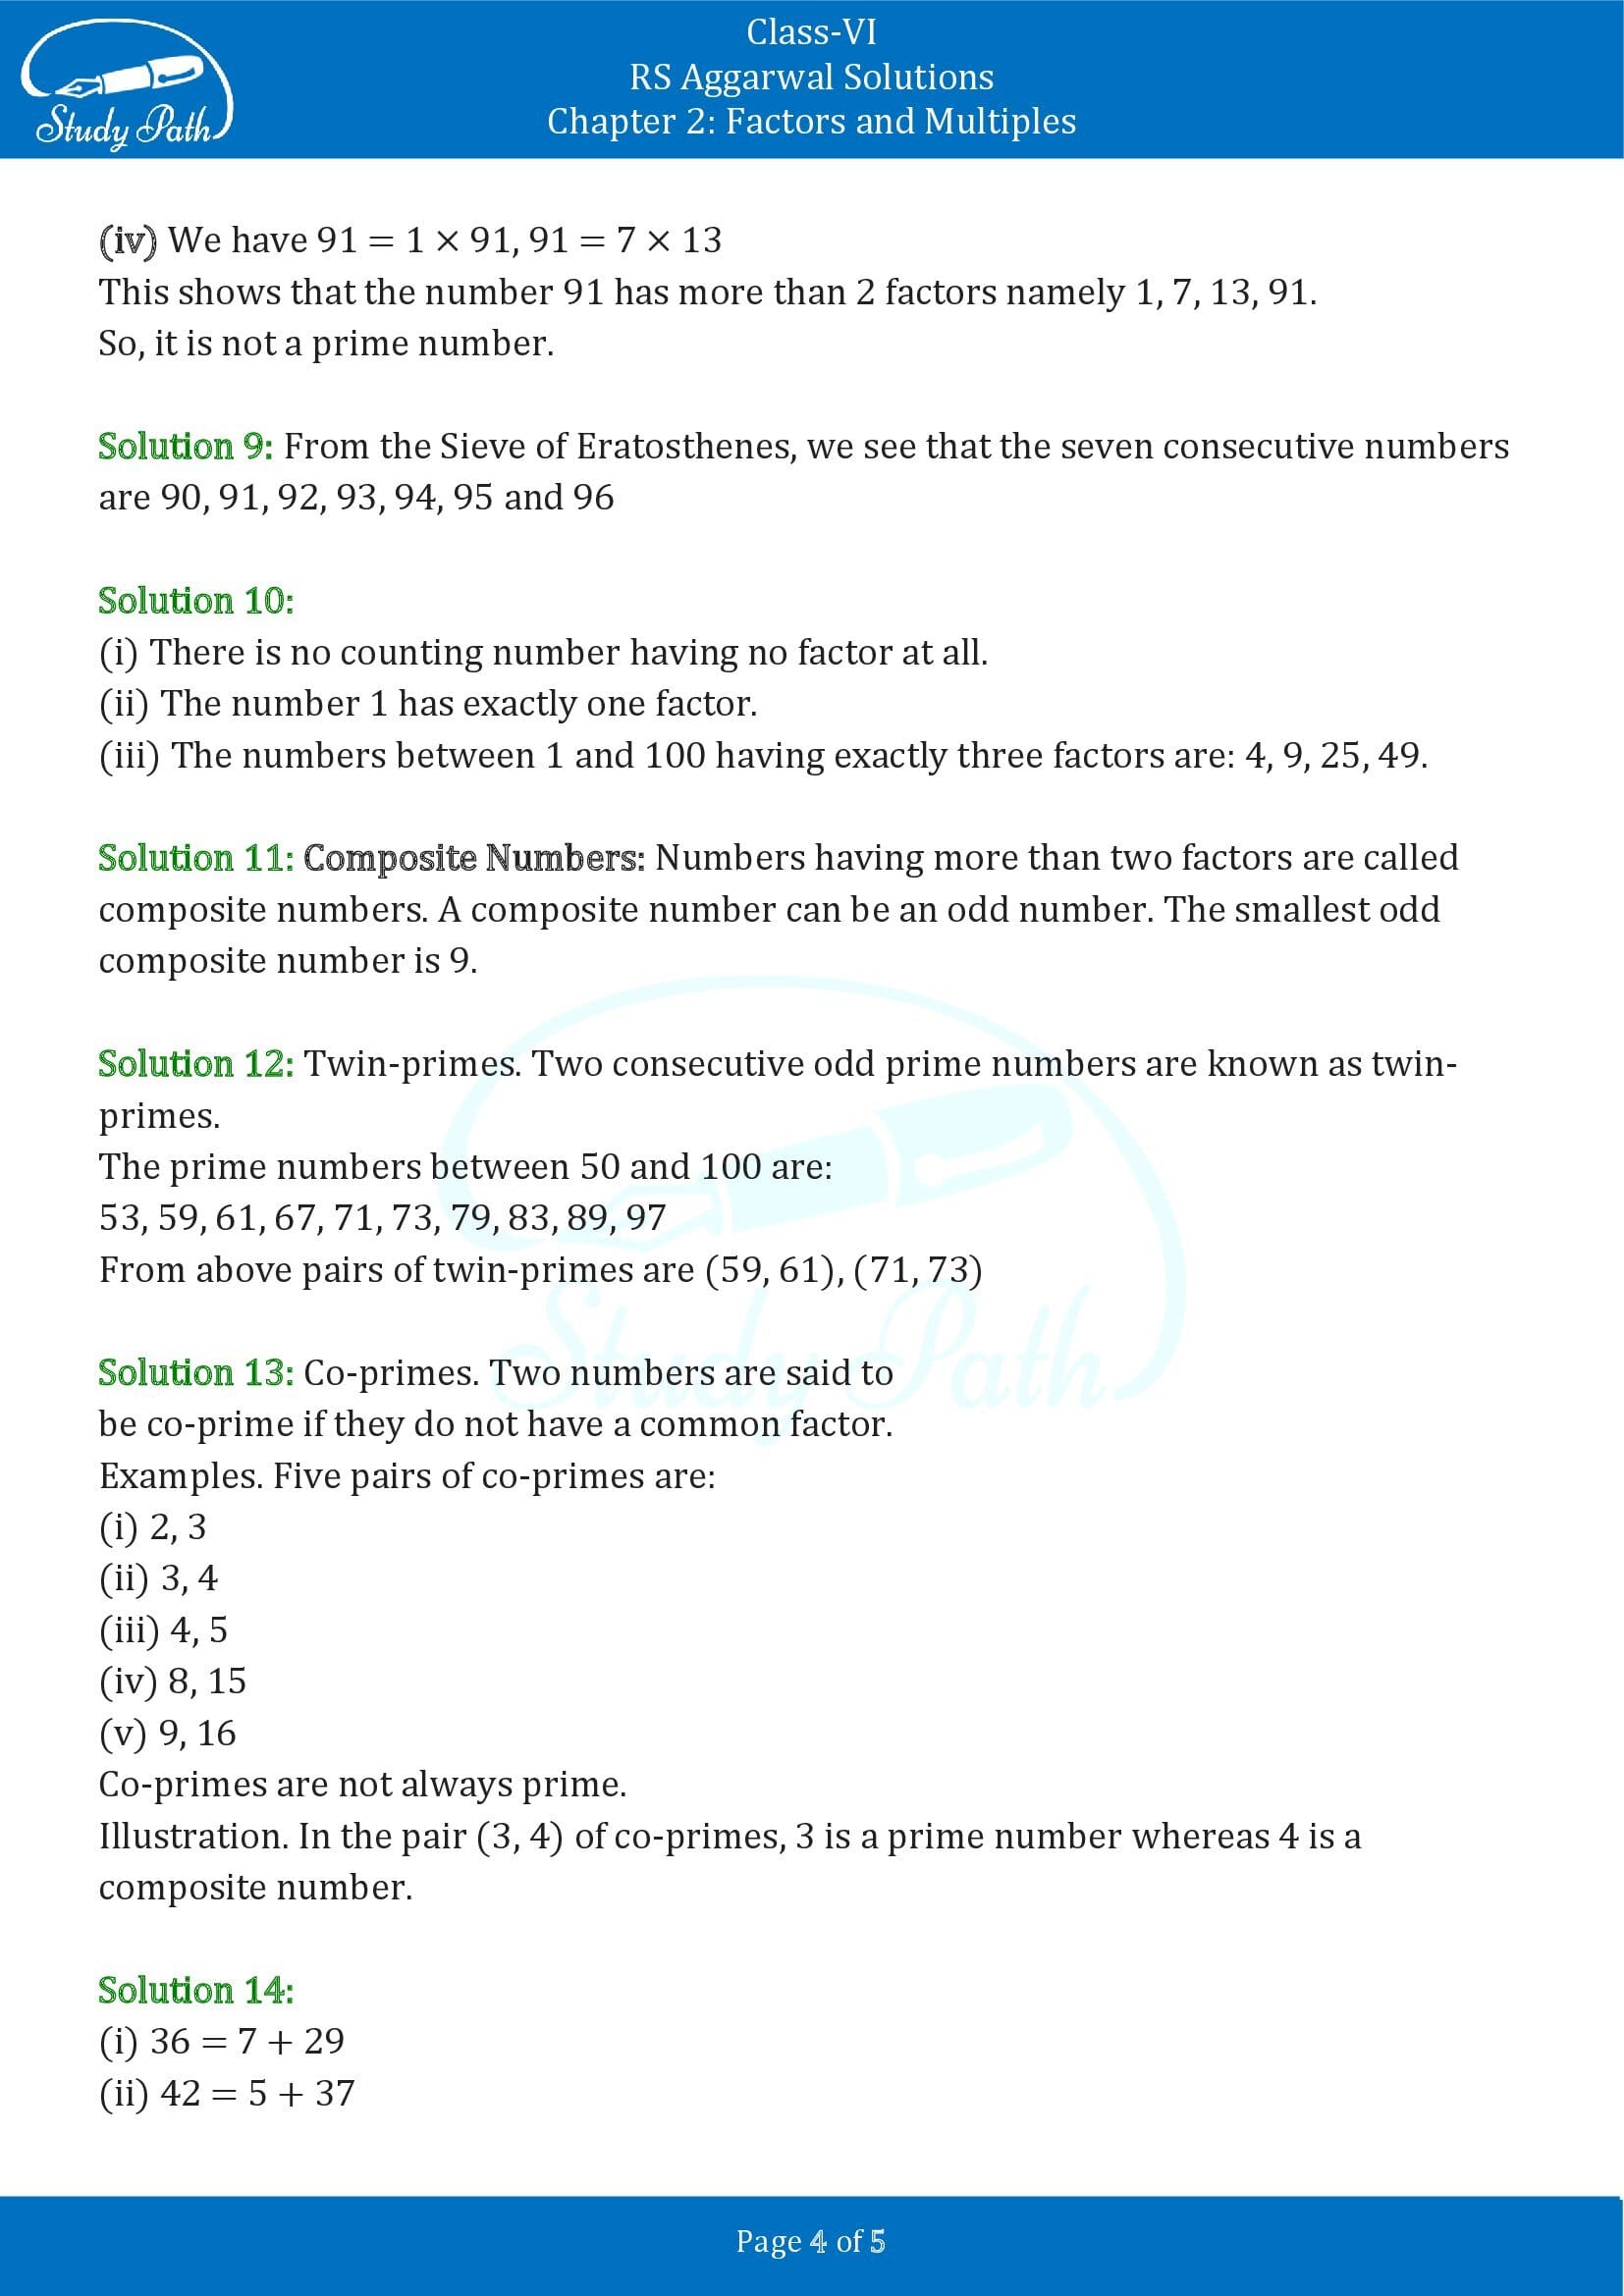 RS Aggarwal Solutions Class 6 Chapter 2 Factors and Multiples Exercise 2A 00004